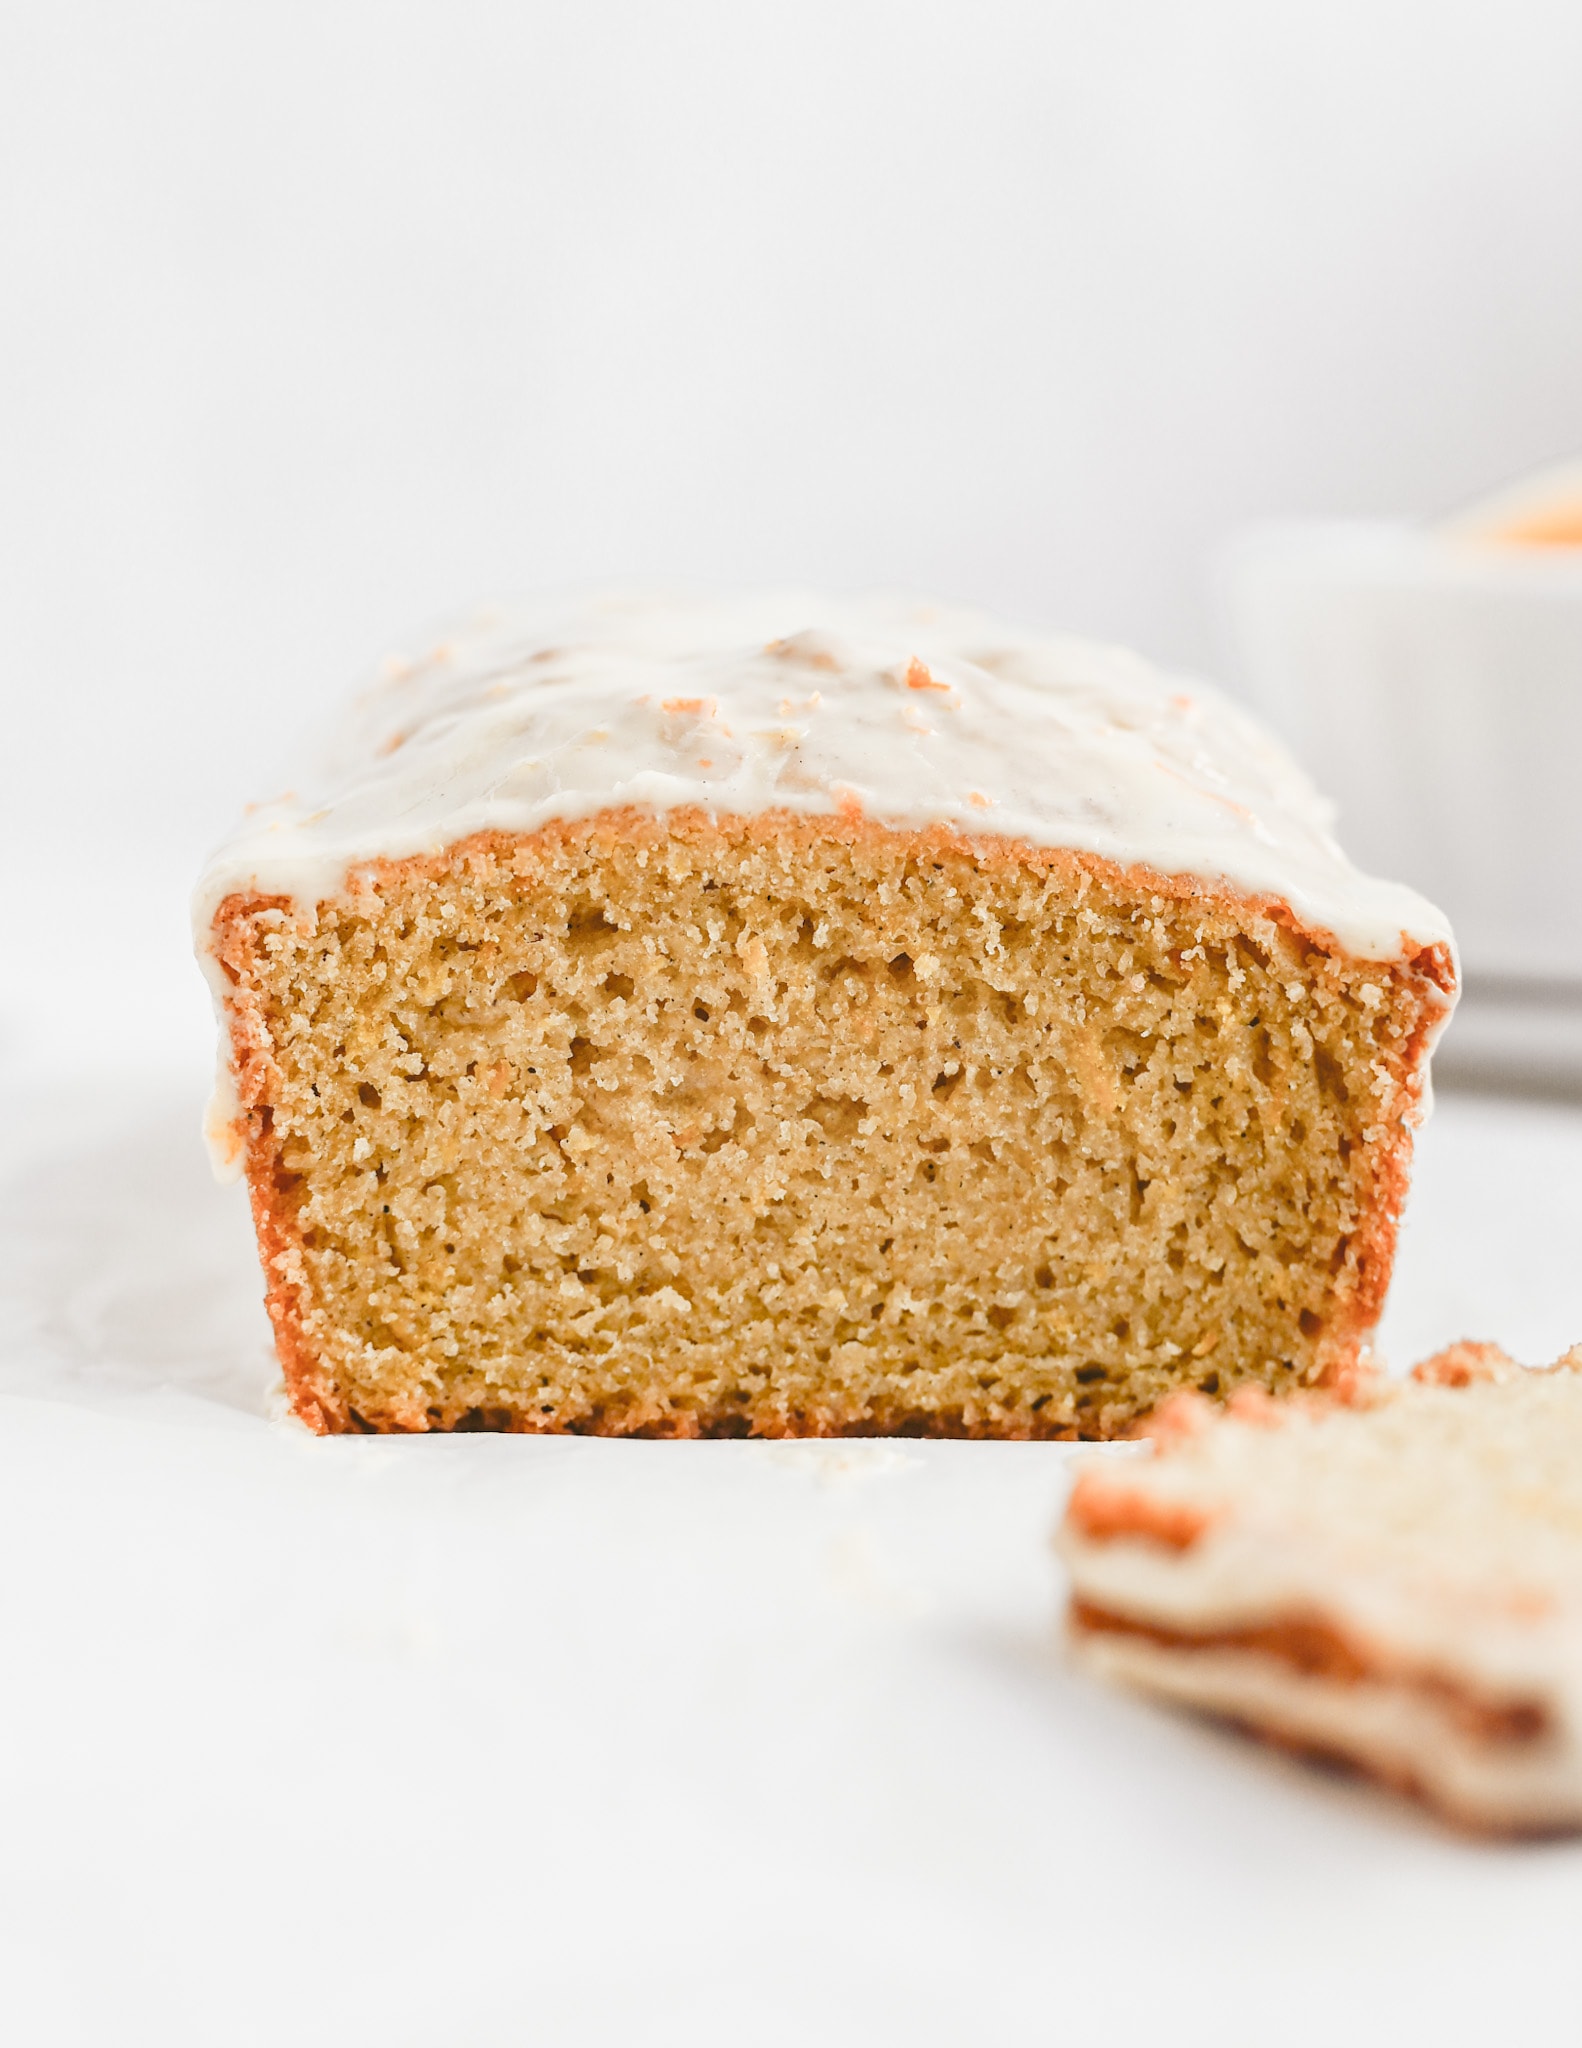 gluten free orange cardamom bread with a sliced removed reveal a soft moist interior